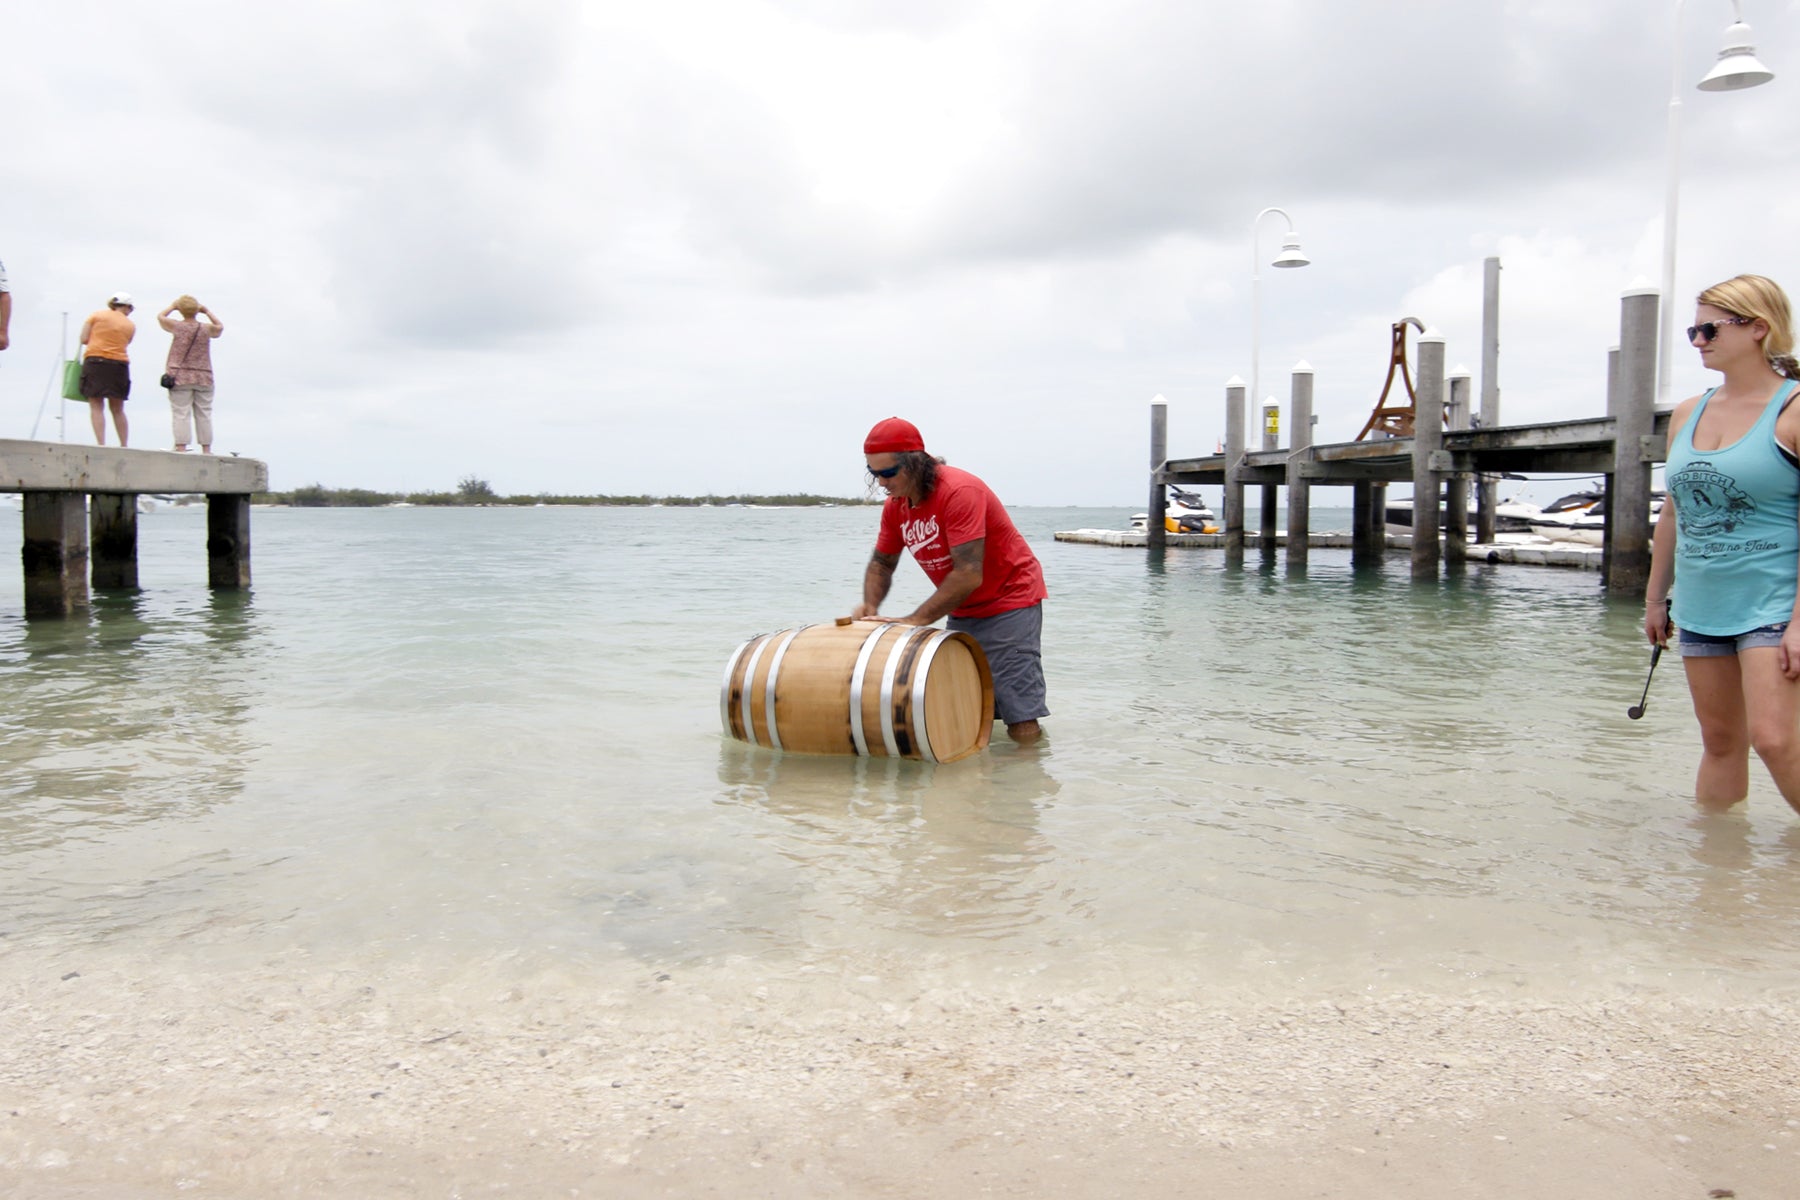 Paul Menta of Key West Legal Rum Distillery submerges a wooden barrel in the shallow salt water.